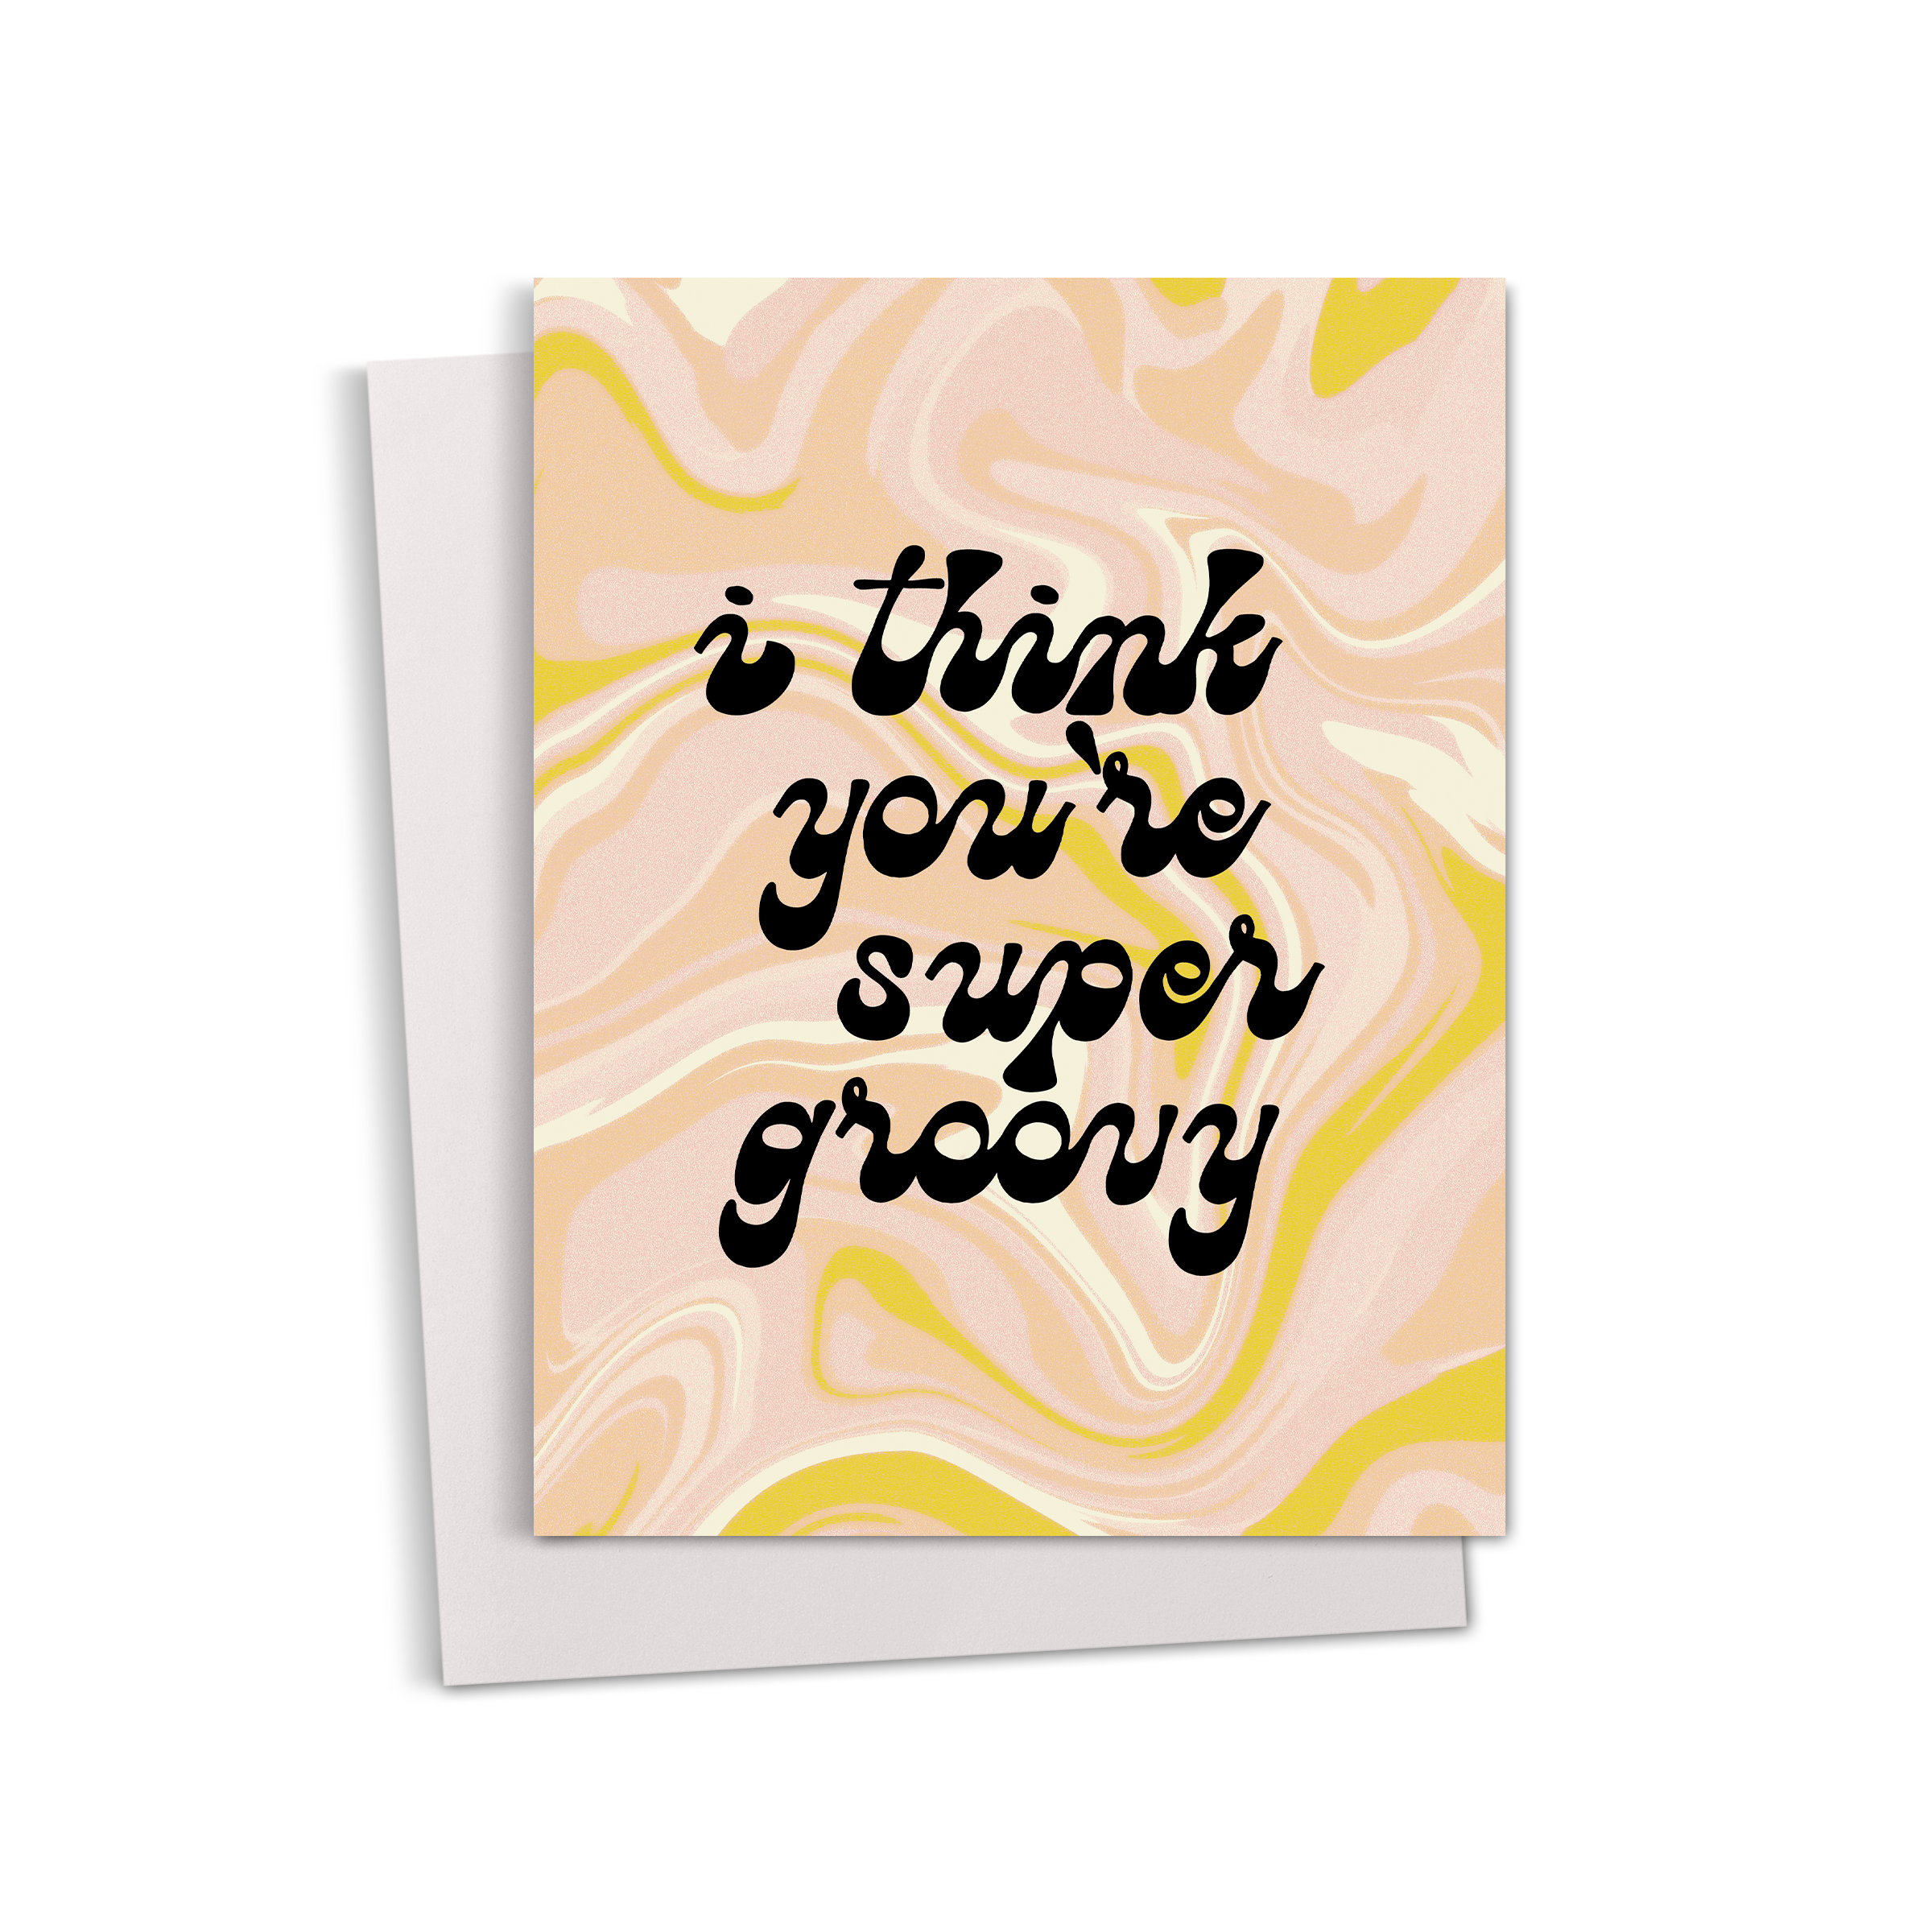 I Think You're Groovy Greeting Card